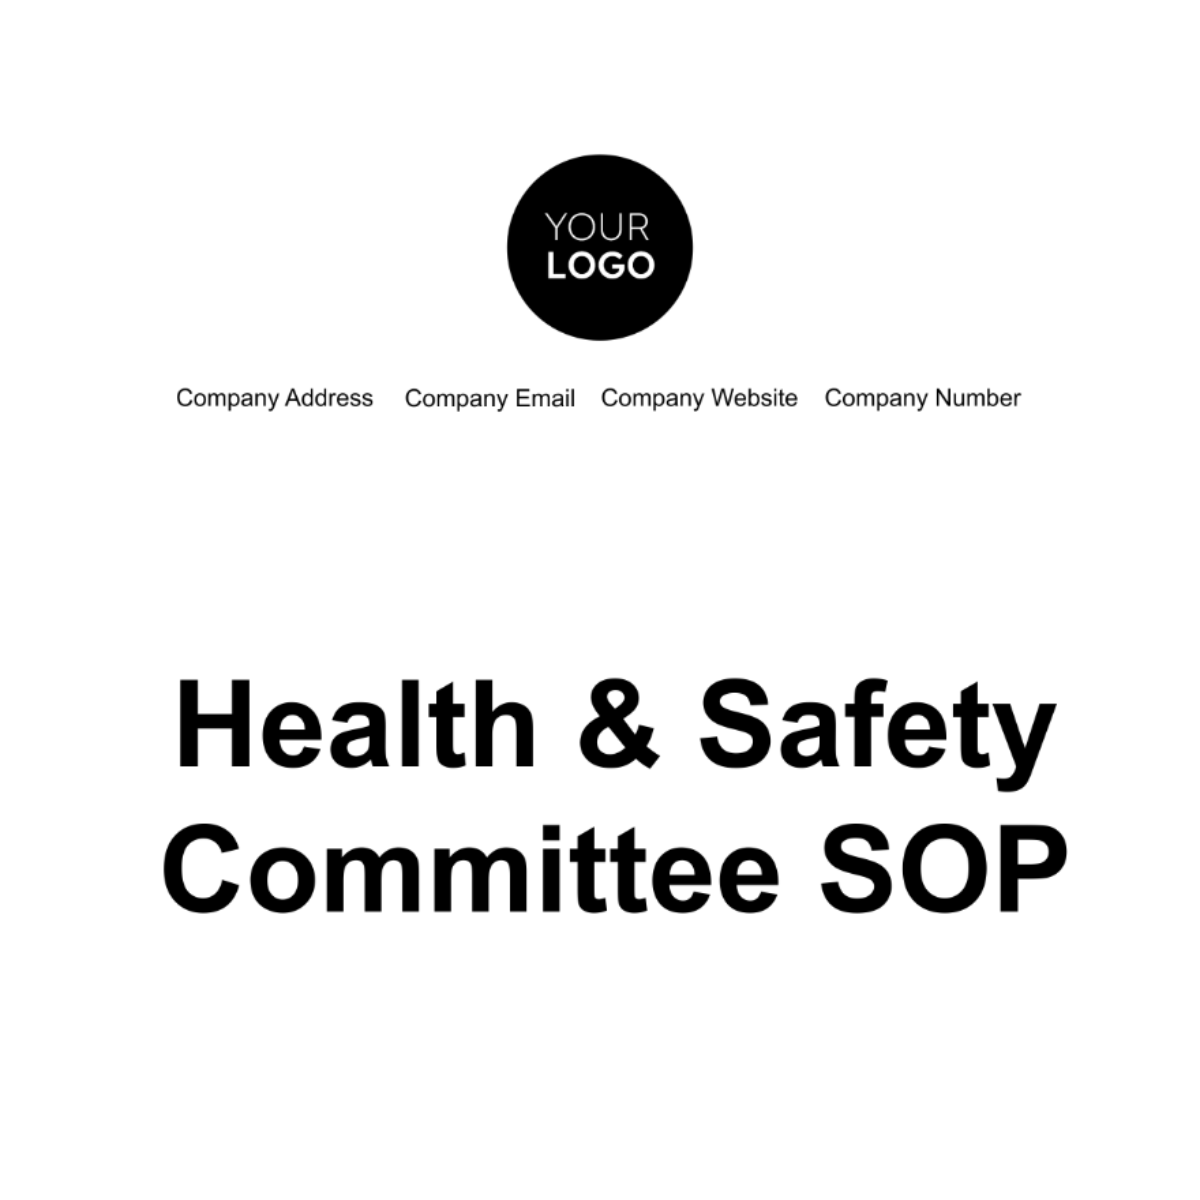 Free Health & Safety Committee SOP Template